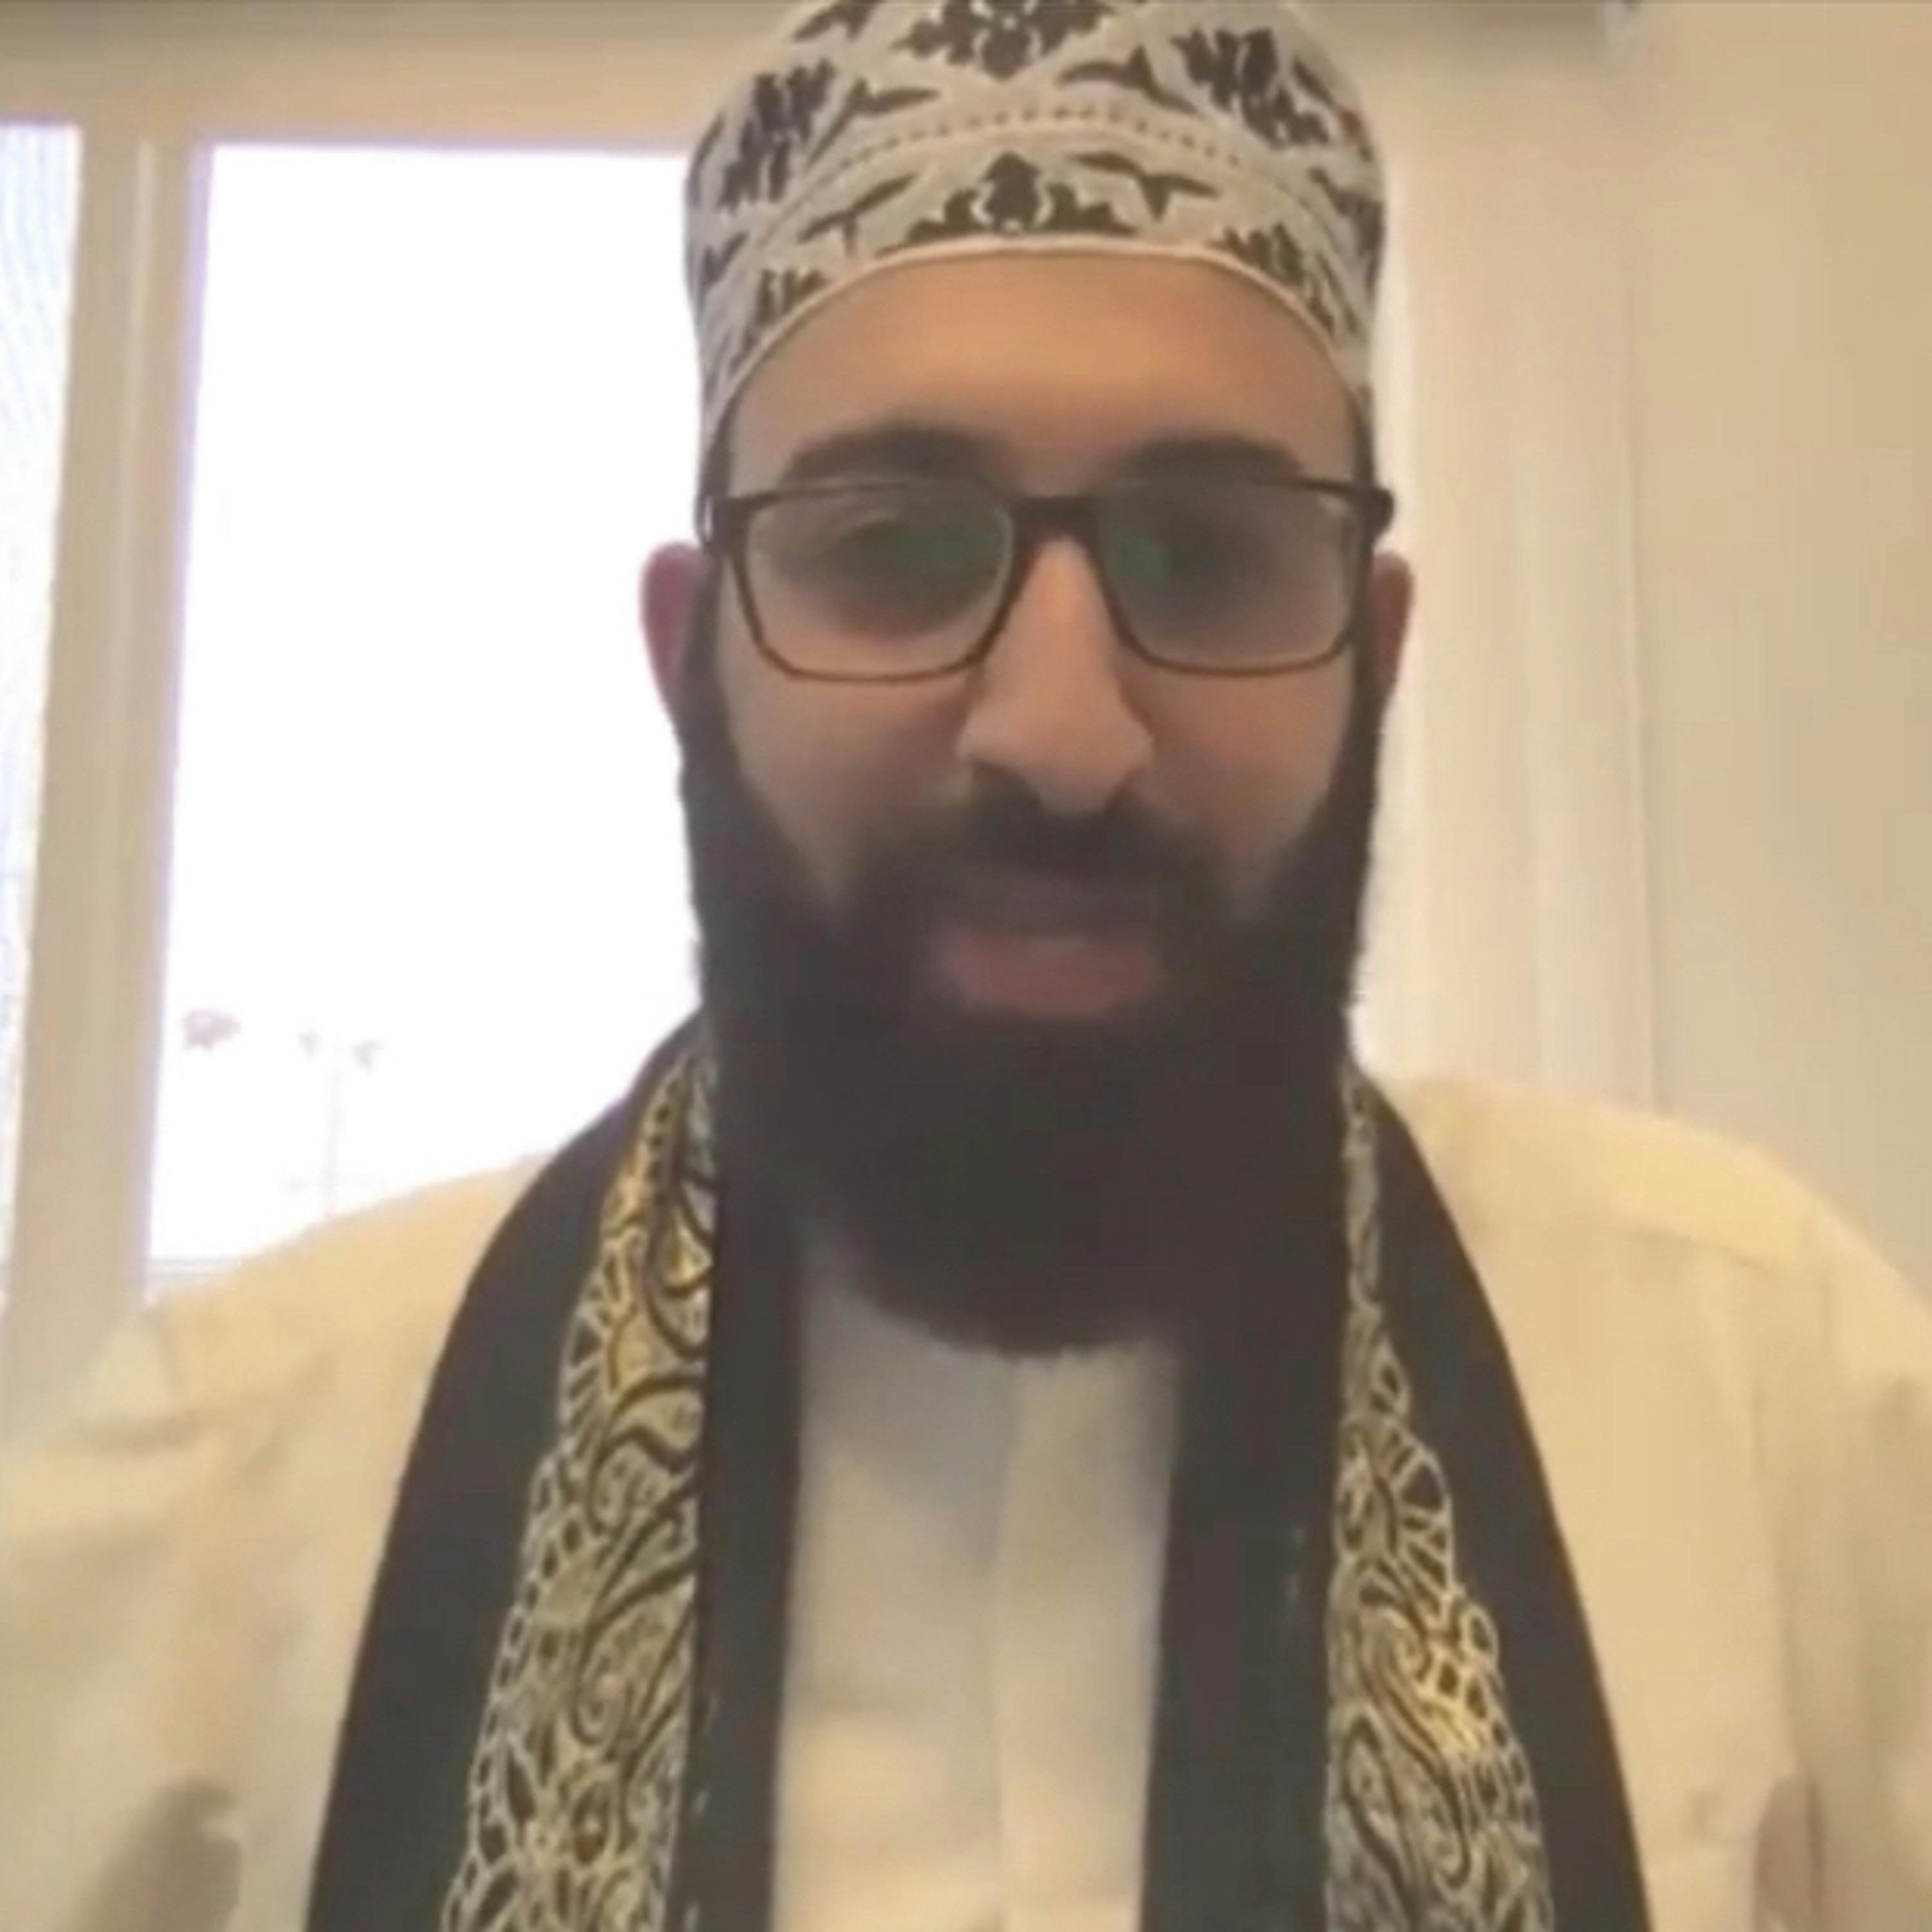 80: The Imam of Peace, Mohammad Tawhidi: Without Israel, Islam “loses a fundamental pillar”